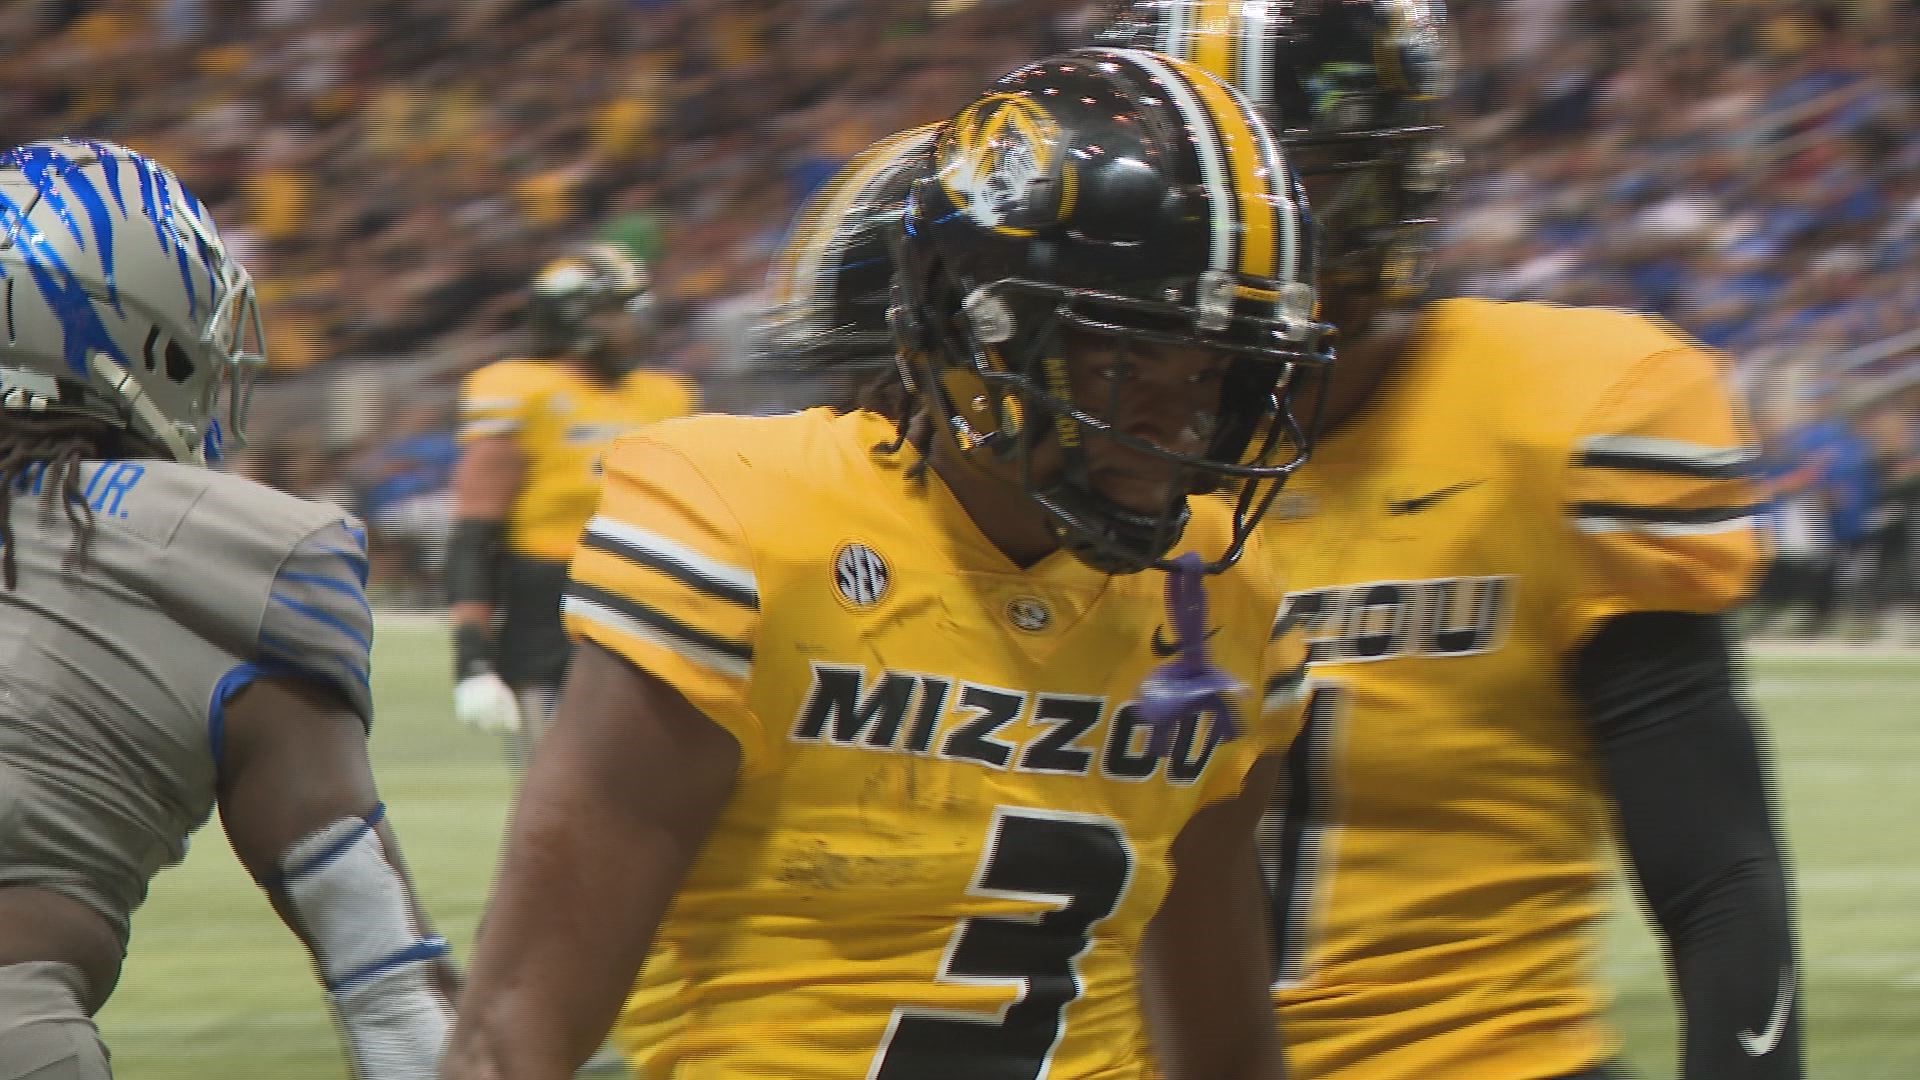 Mizzou came to St. Louis to take on Memphis at the dome. And they put on quite the show thanks to a handful of STL natives in a 34-27 win.